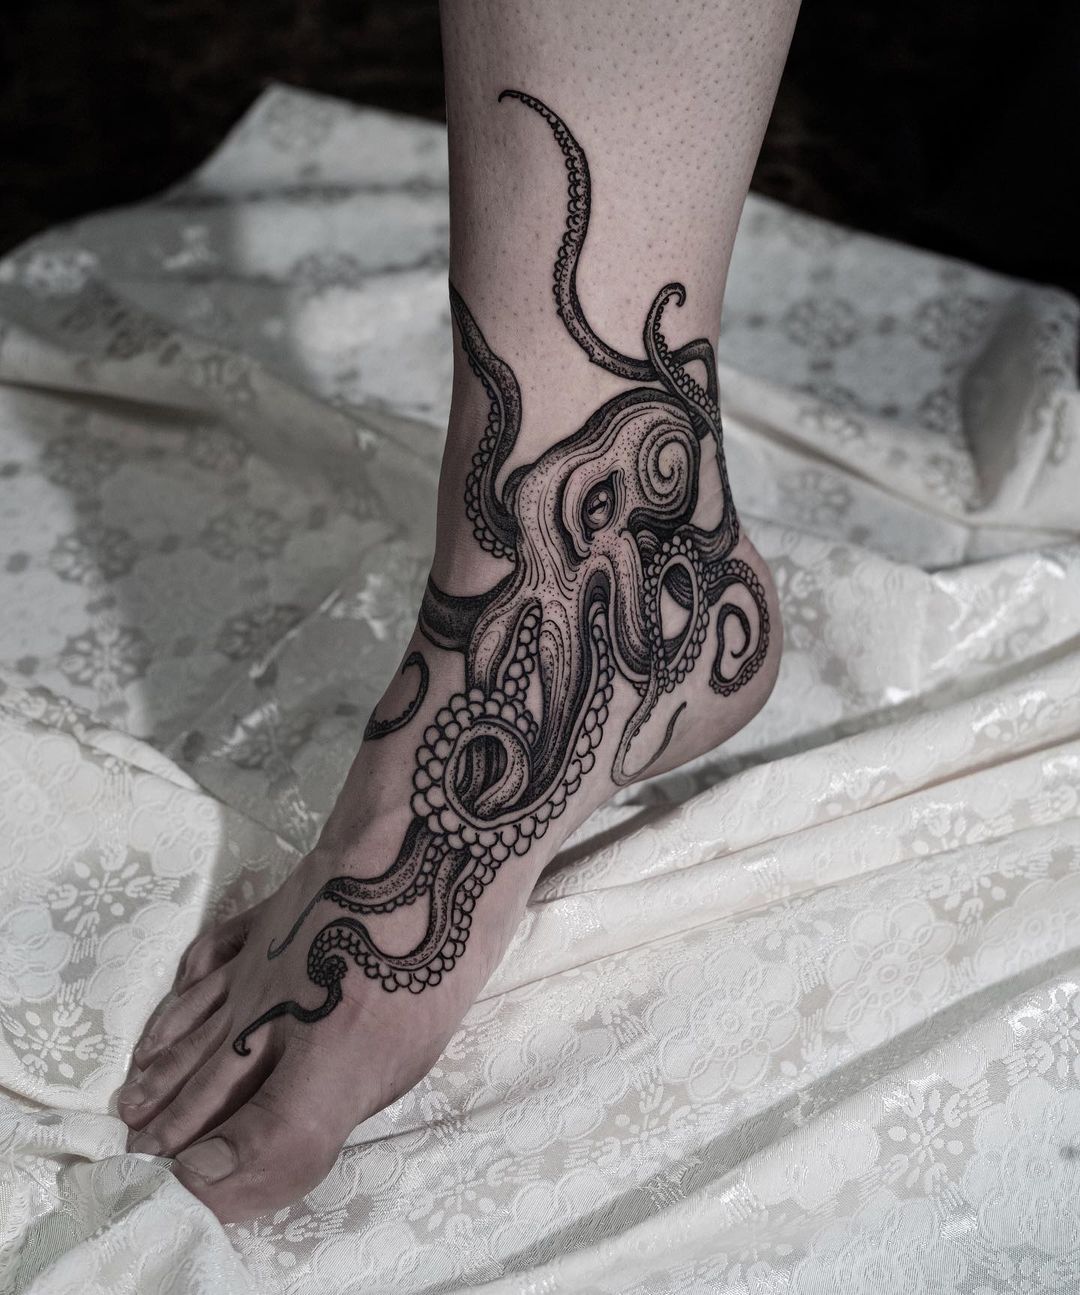 a male tattoo of a large octopus